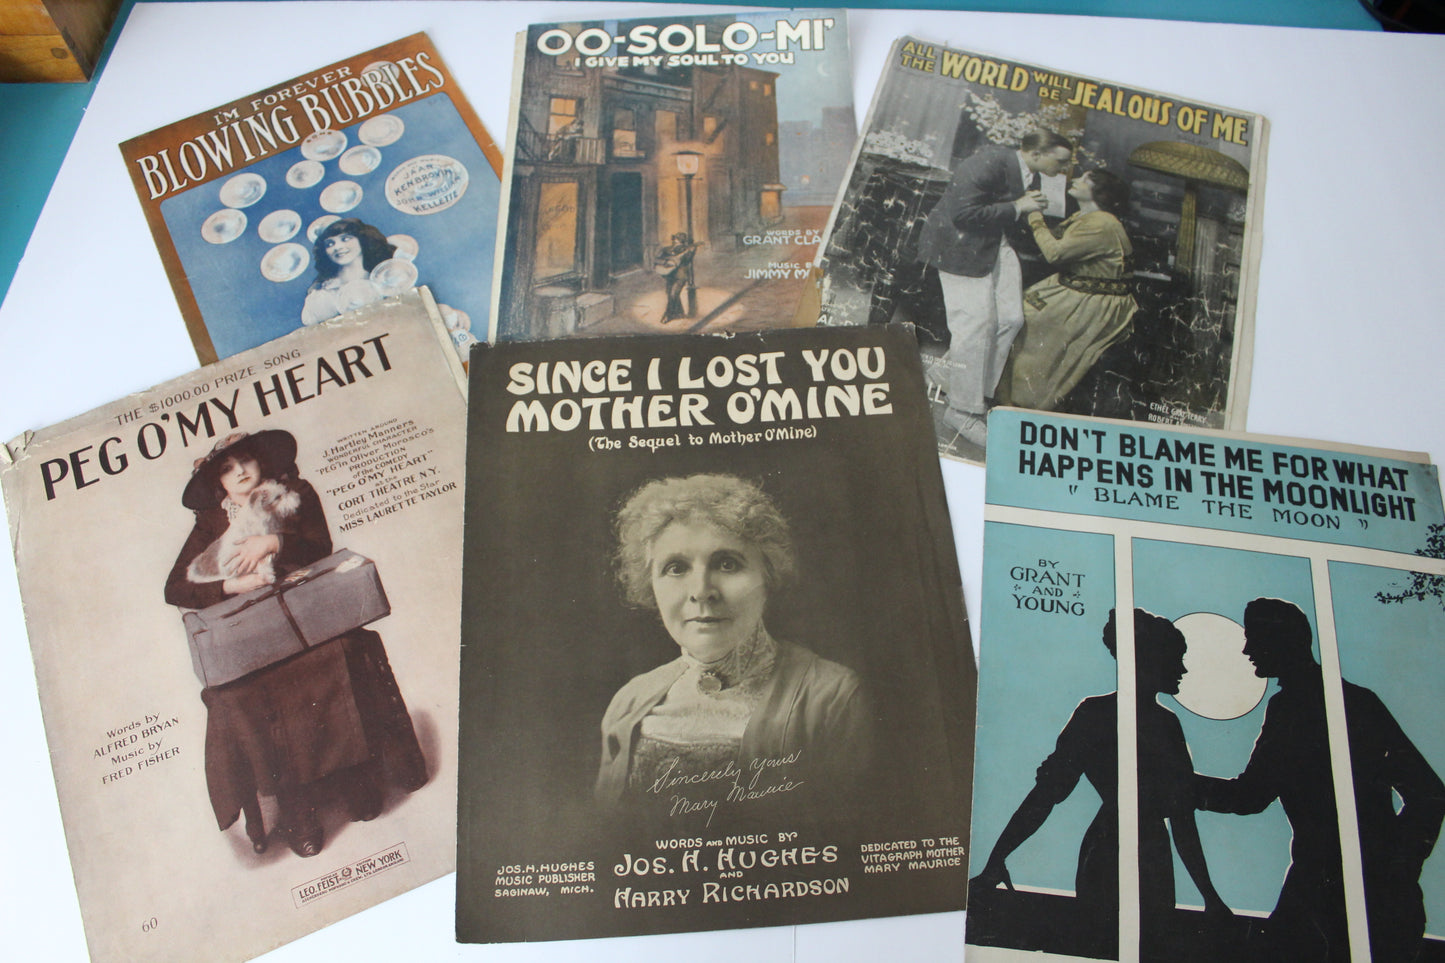 Collection 100+ Antique Vintage 1920s WW1 Romantic Sheet Music Song Books Music Use Papercraft DIY 00 solo mio